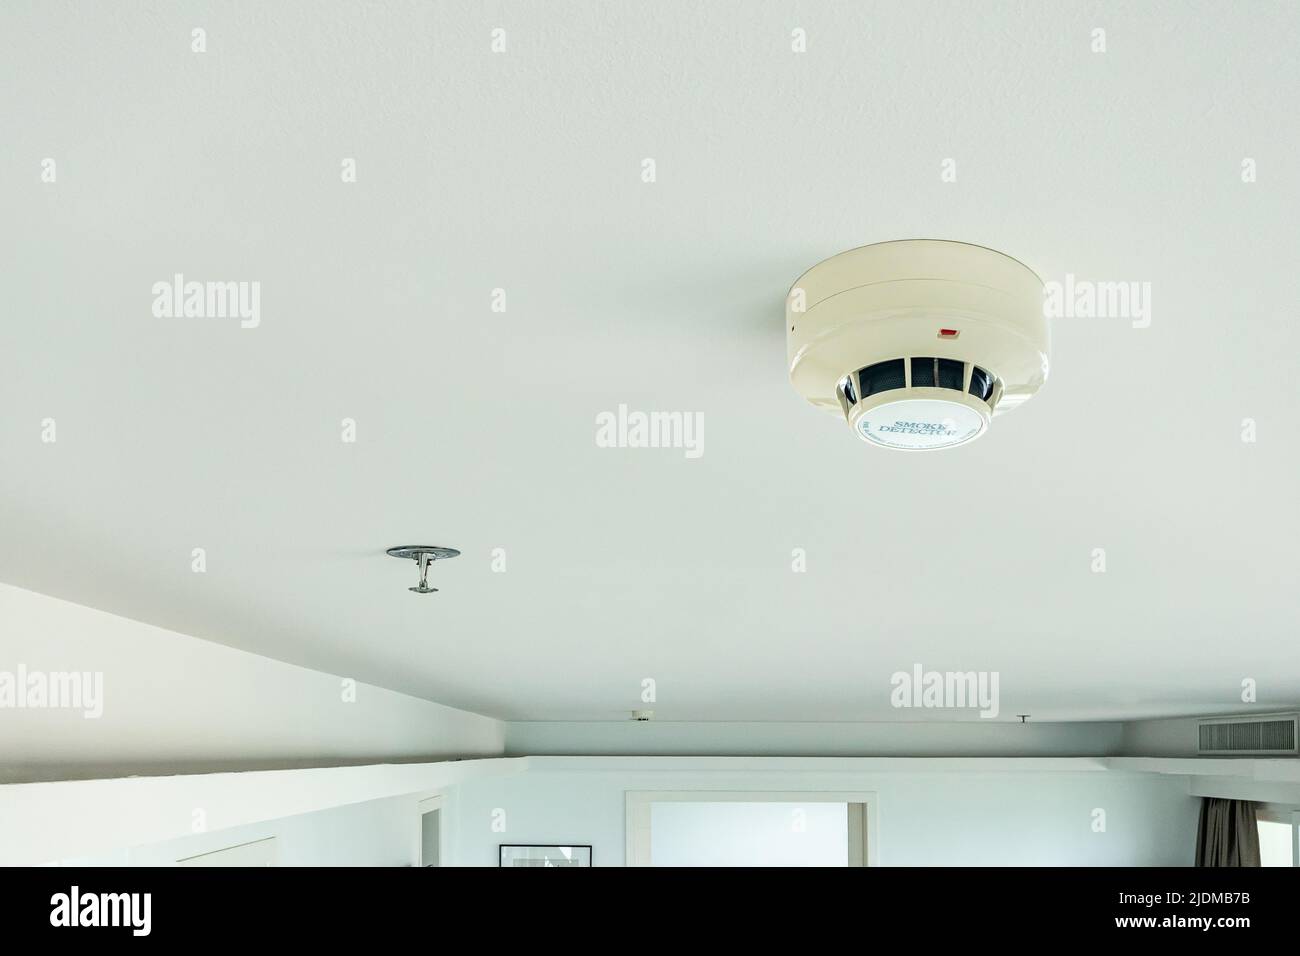 smoke detector and fire sprinkler on ceiling, fire alarming system and security system at home property for safety domestic life Stock Photo